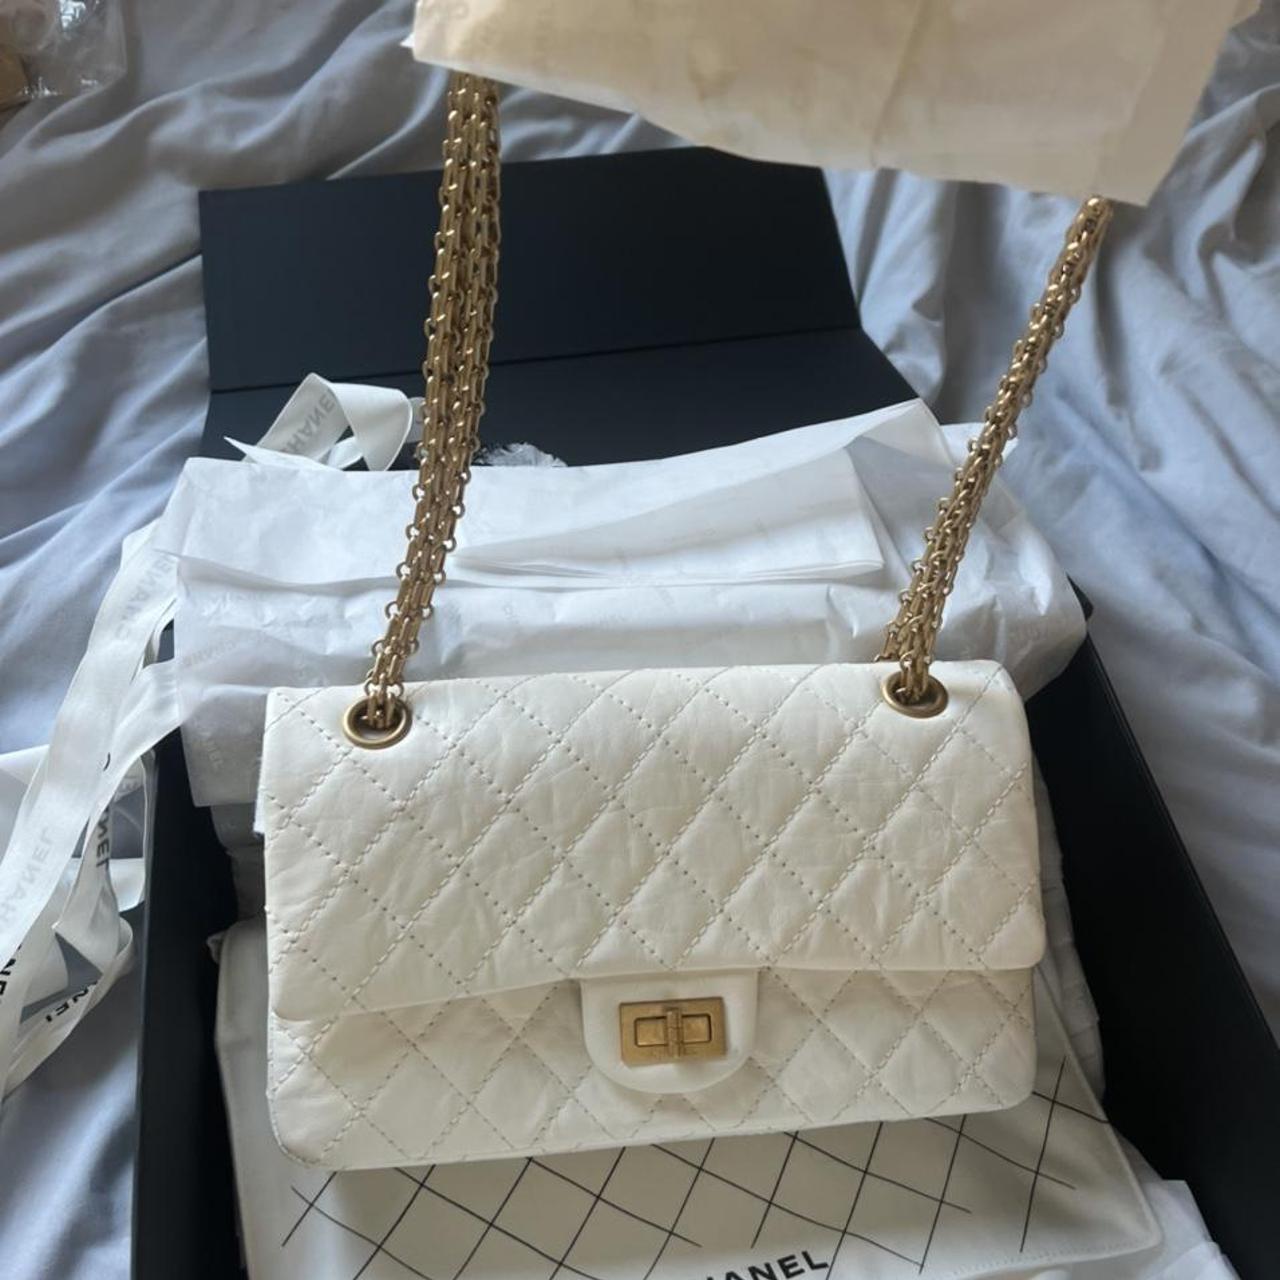 Chanel Women's White and Gold Bag | Depop